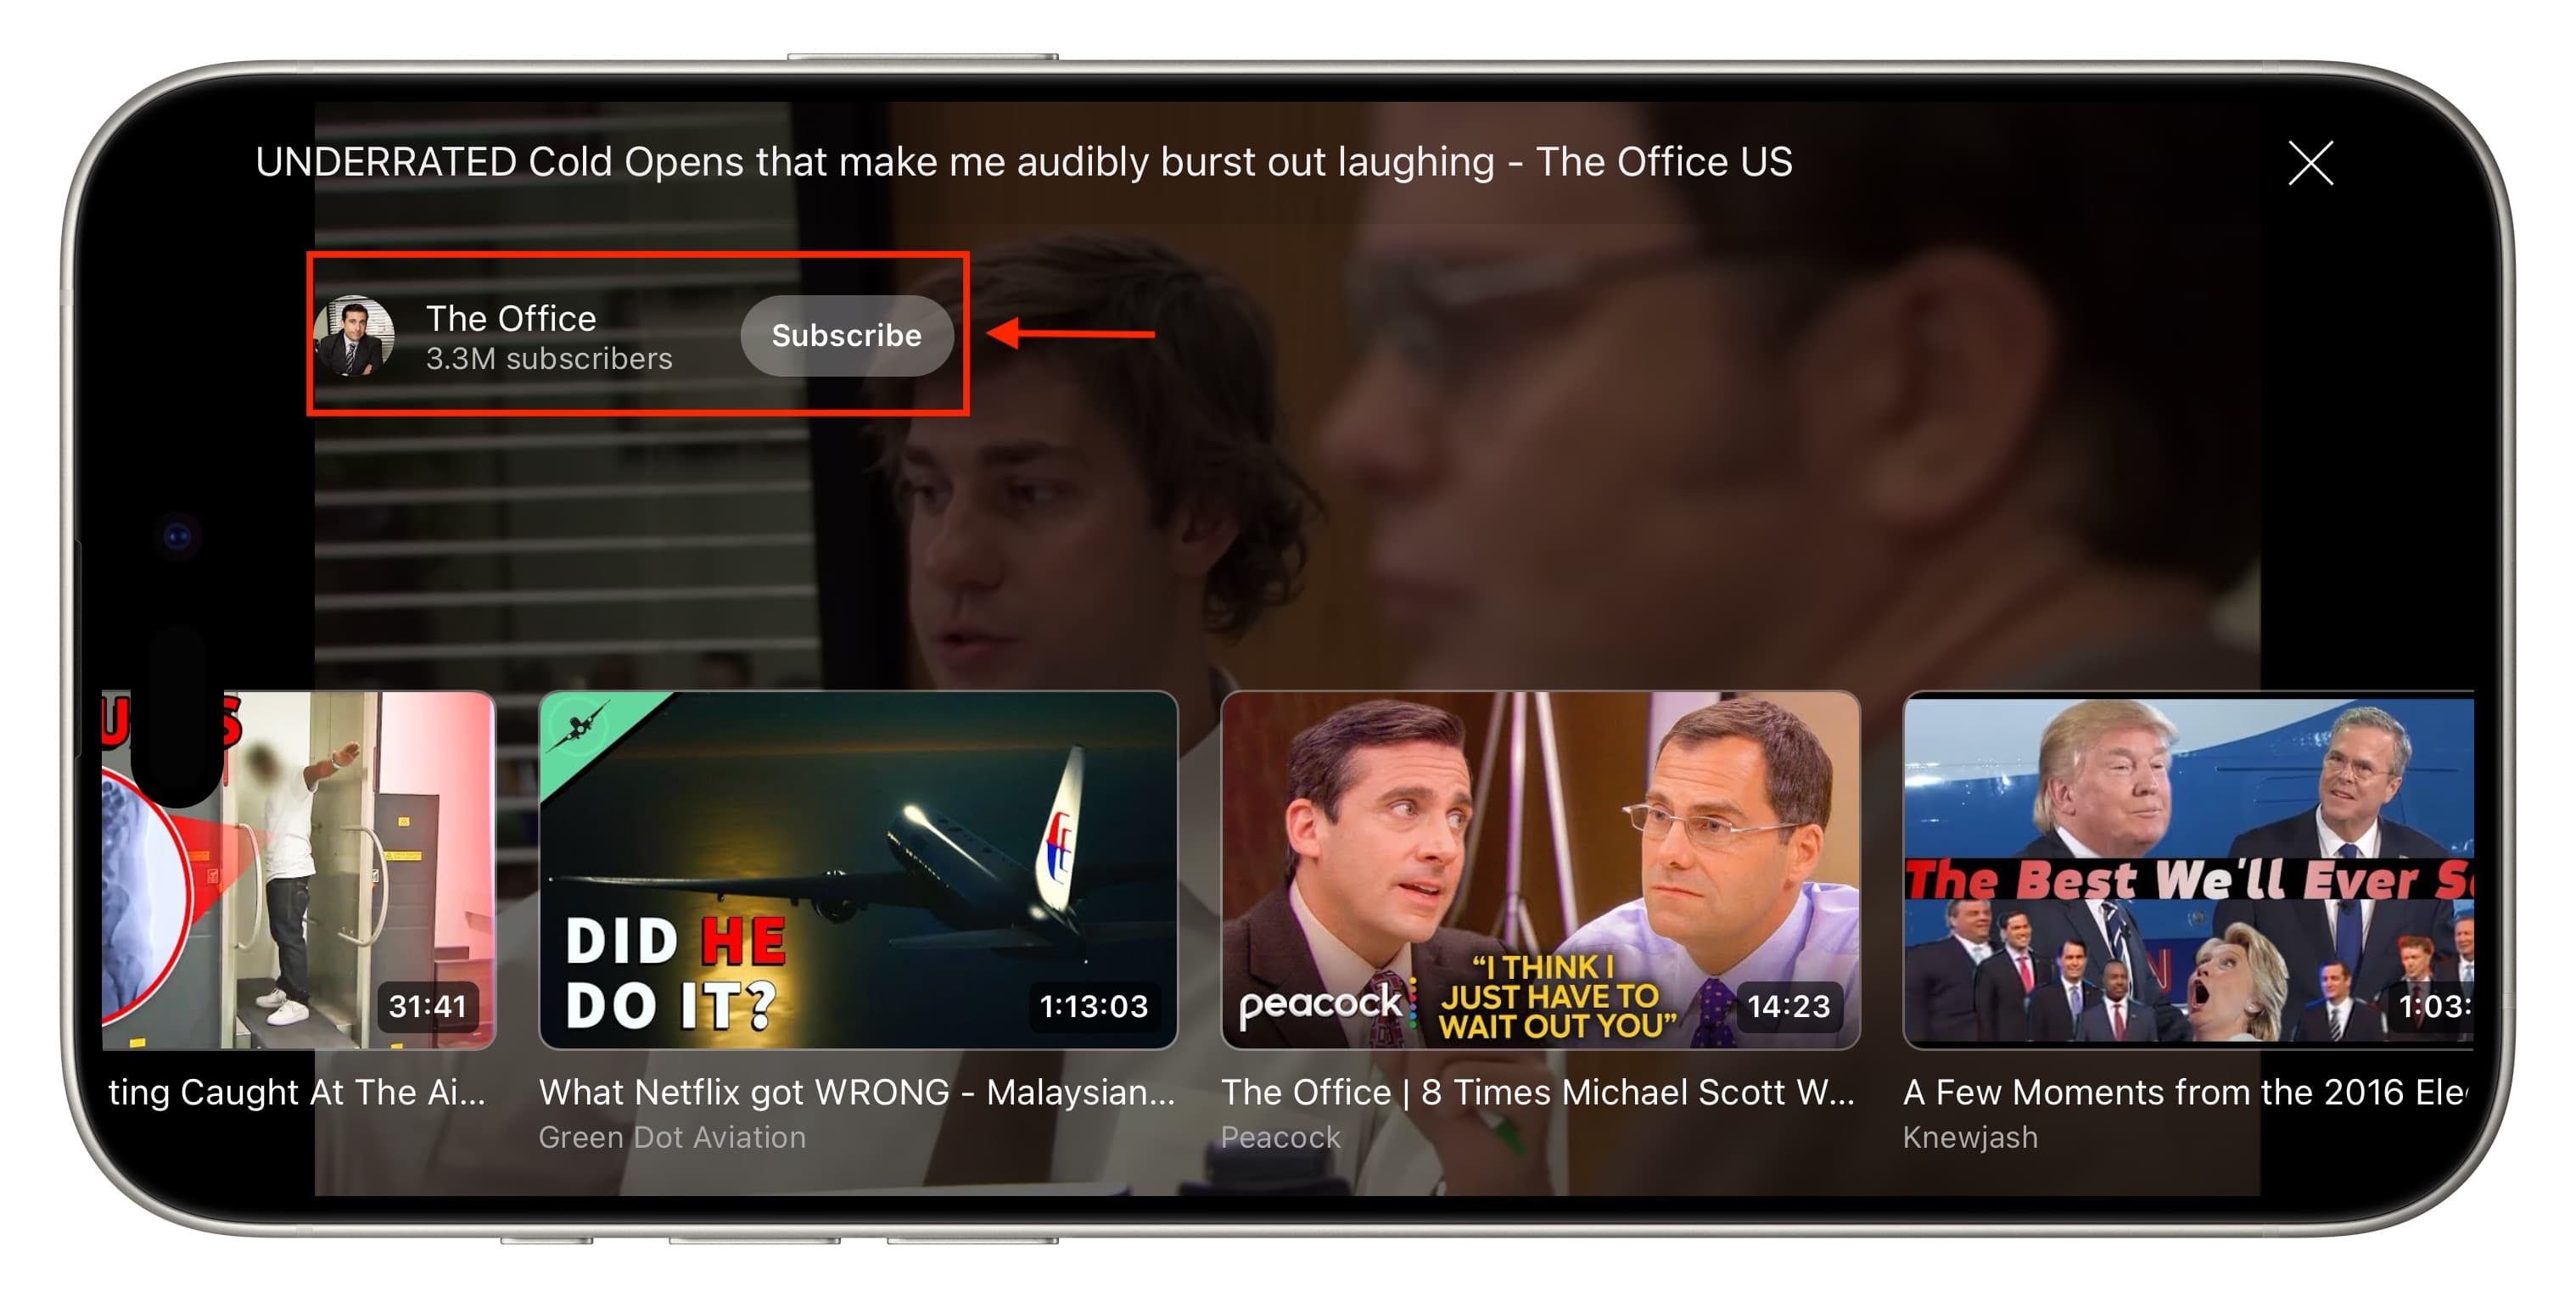 Subscribe to channel when watching YouTube videos in full screen